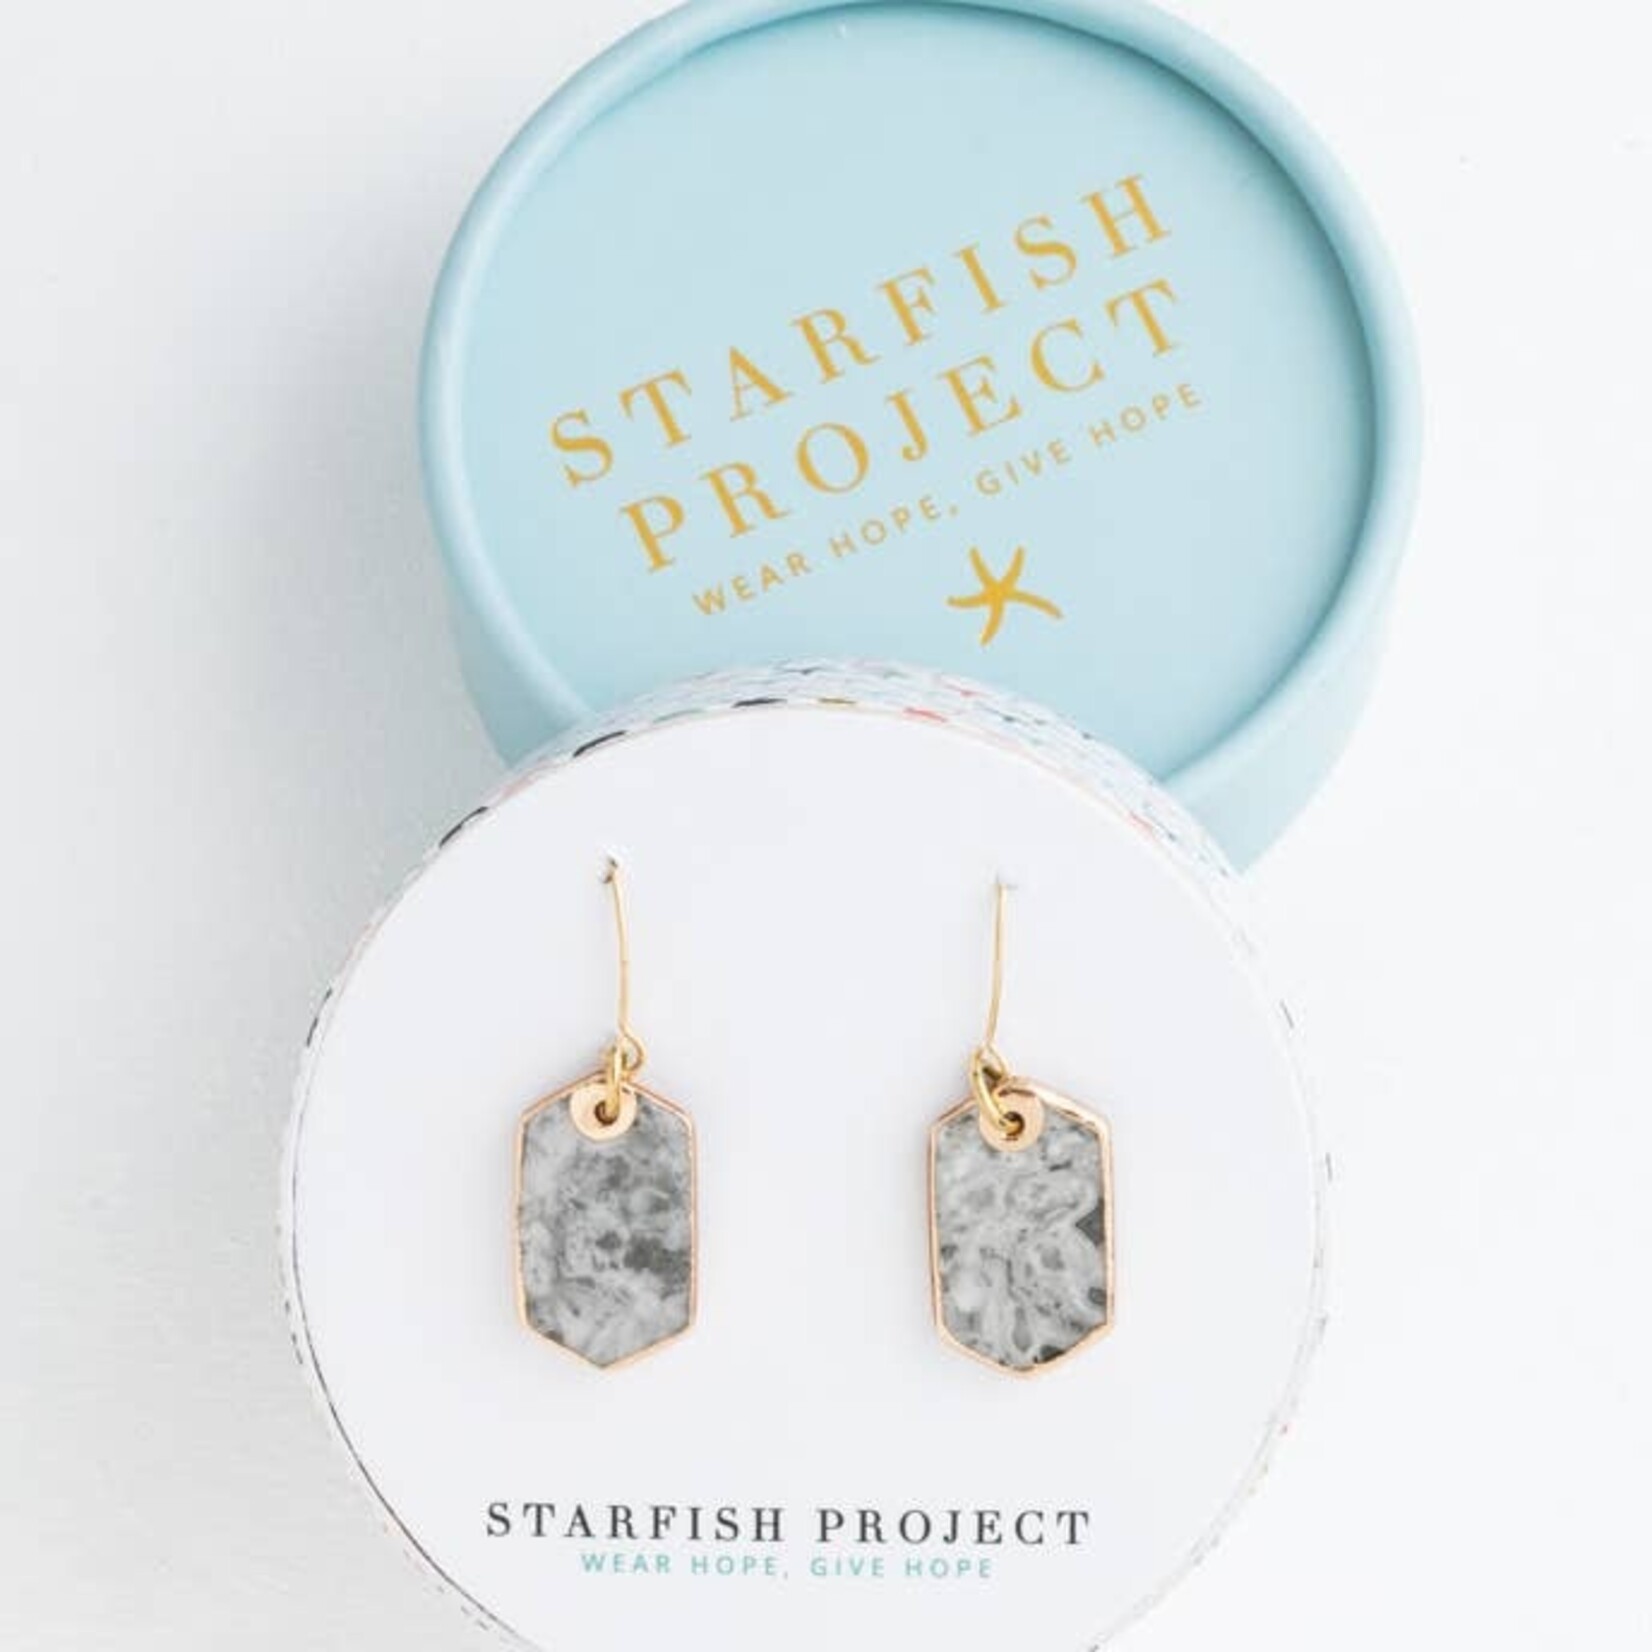 The Starfish Project Ink Stone Earrings in Heather Gray, China